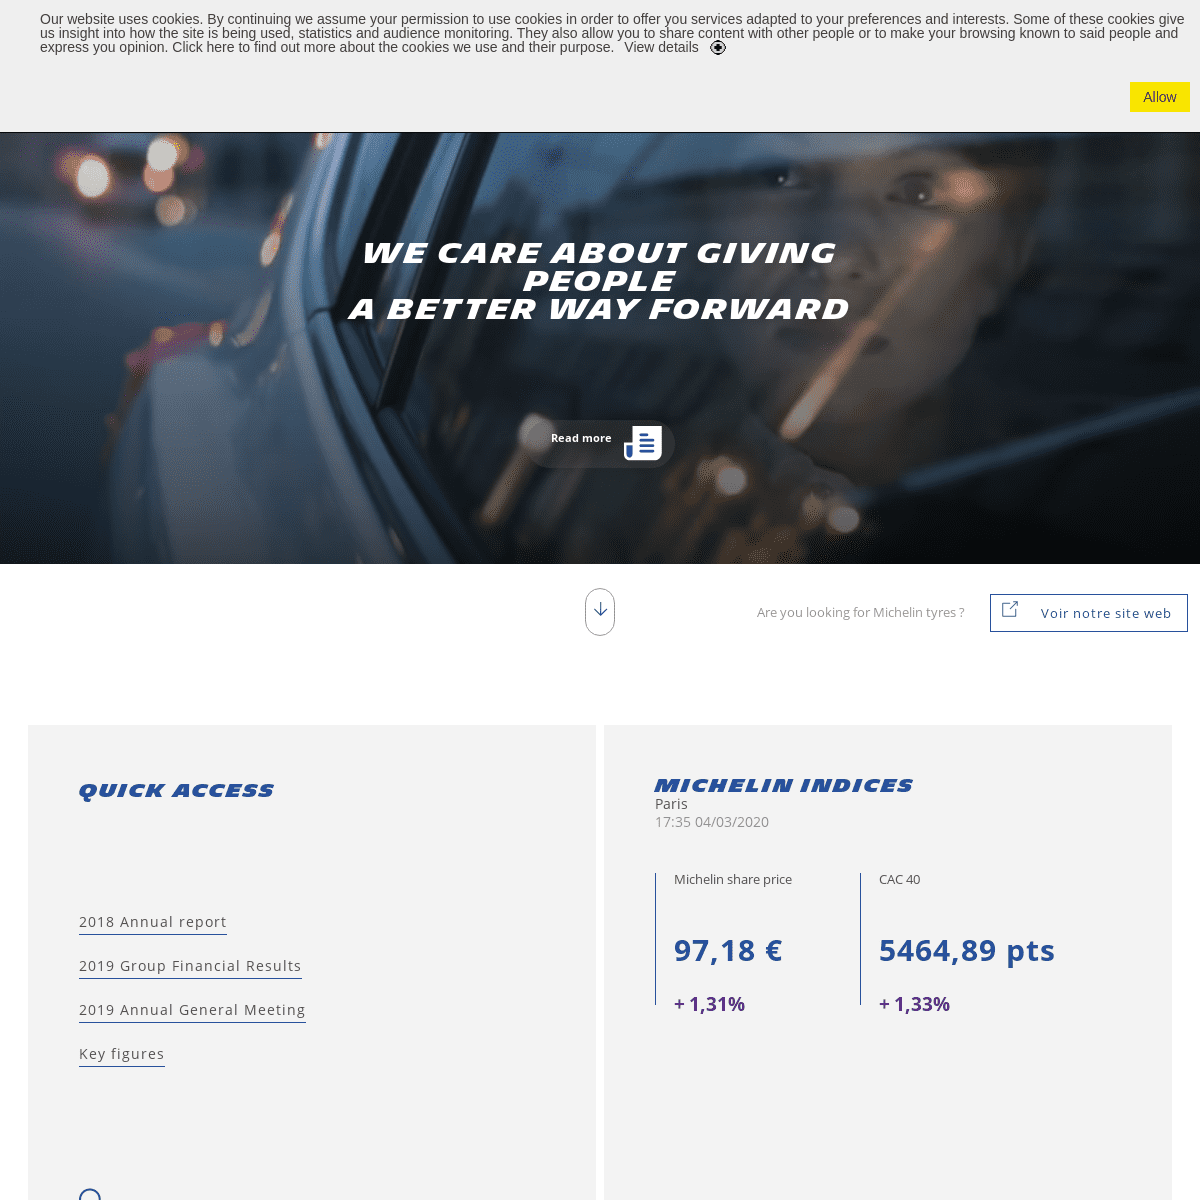 A complete backup of michelin.com